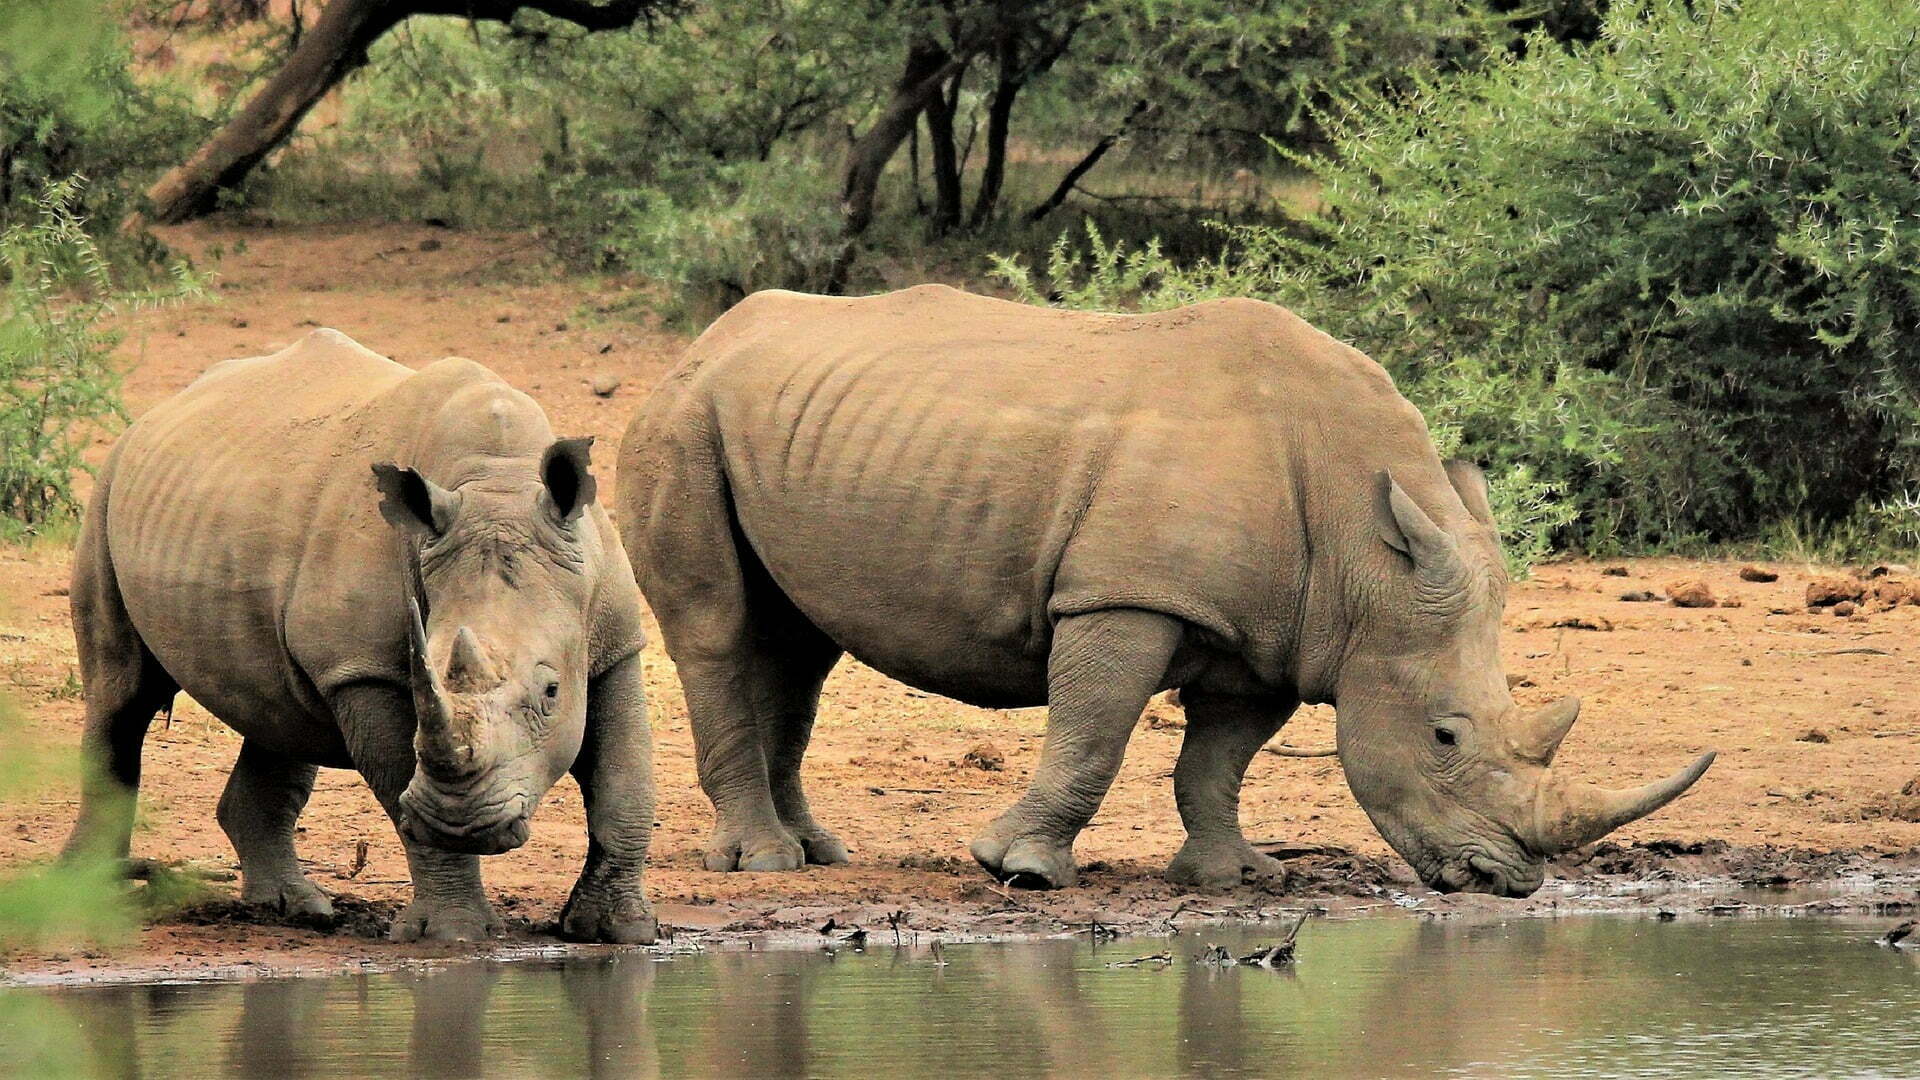 white rhino g9d7fa12b4 1920 Counterintuitive: Large Wild Herbivores May Help Slow Climate Change